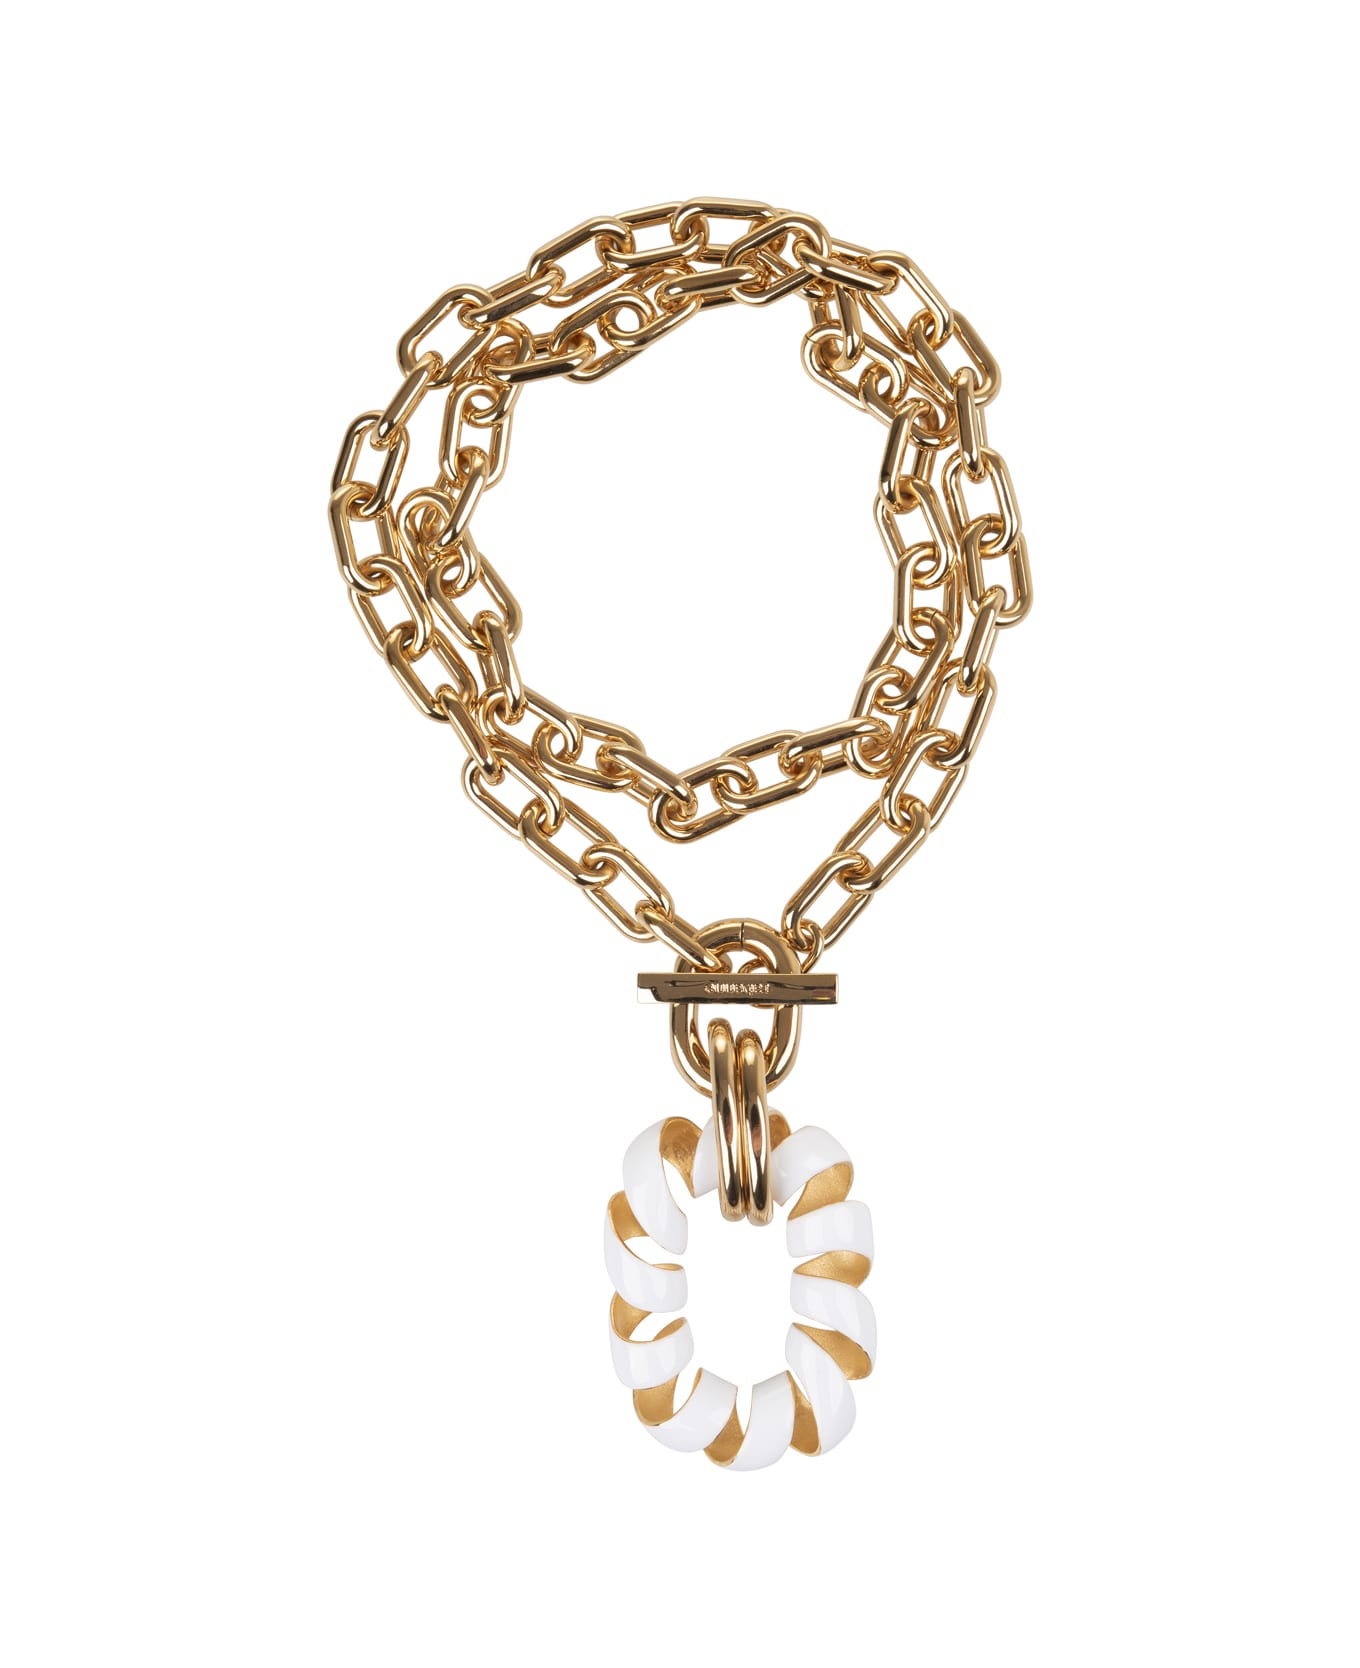 Paco Rabanne Gold Double Xl Link Twist Necklace With White Pendant - Gold